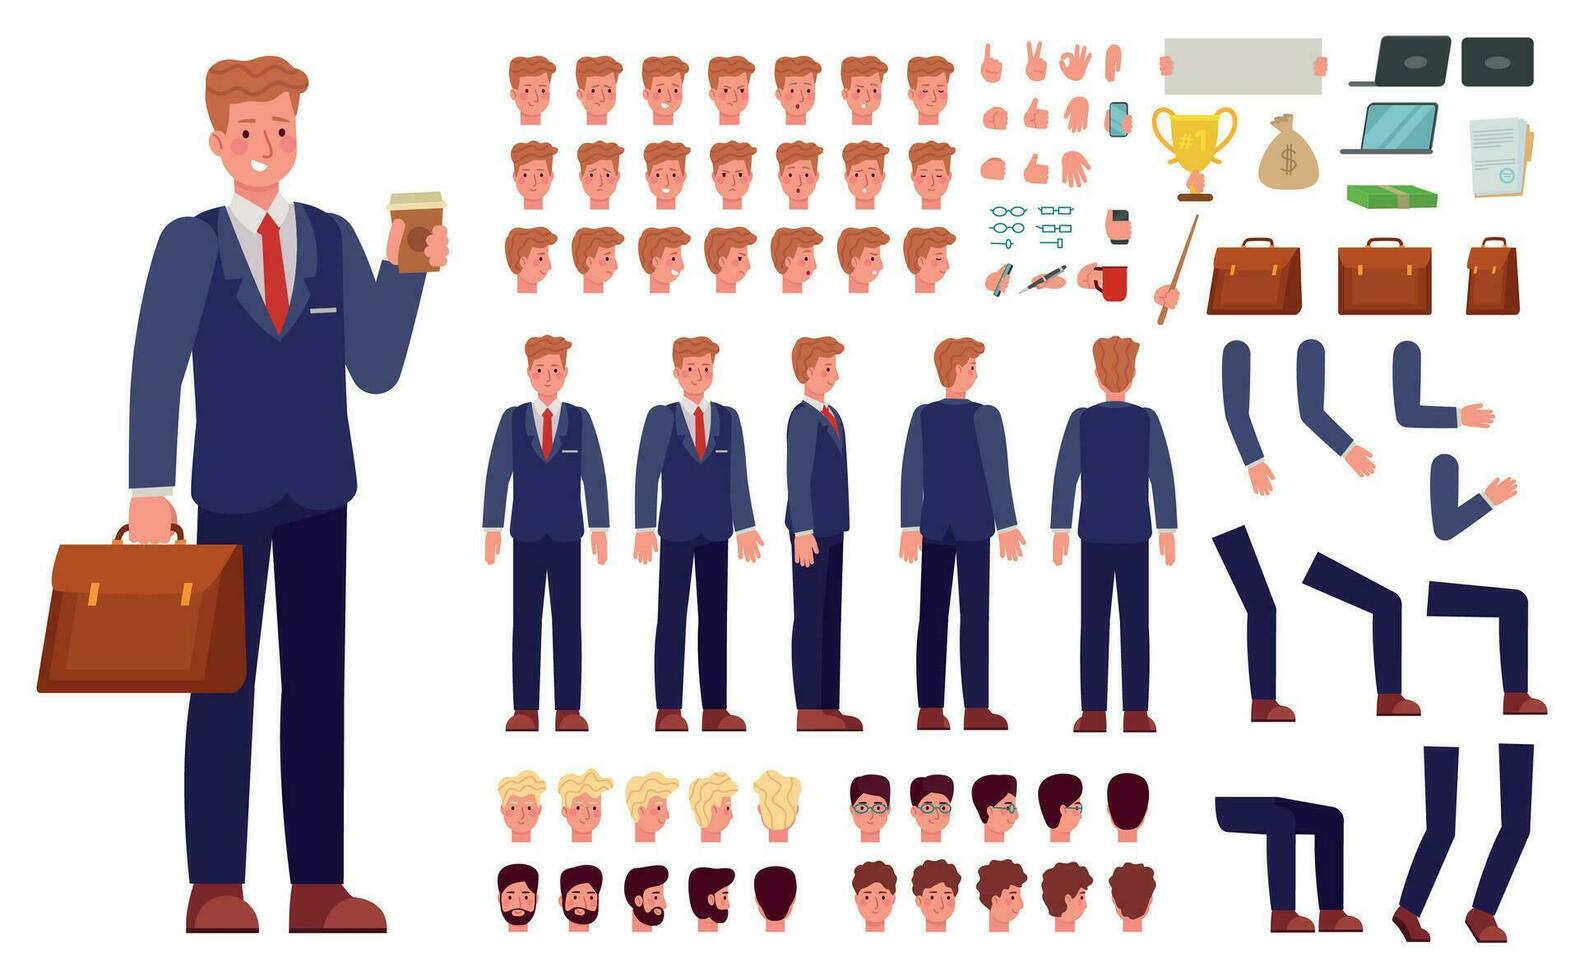 3rfsdf345wefCartoon businessman character kit. Male office employee in suit with briefcase and body parts, face expressions for animation vector set